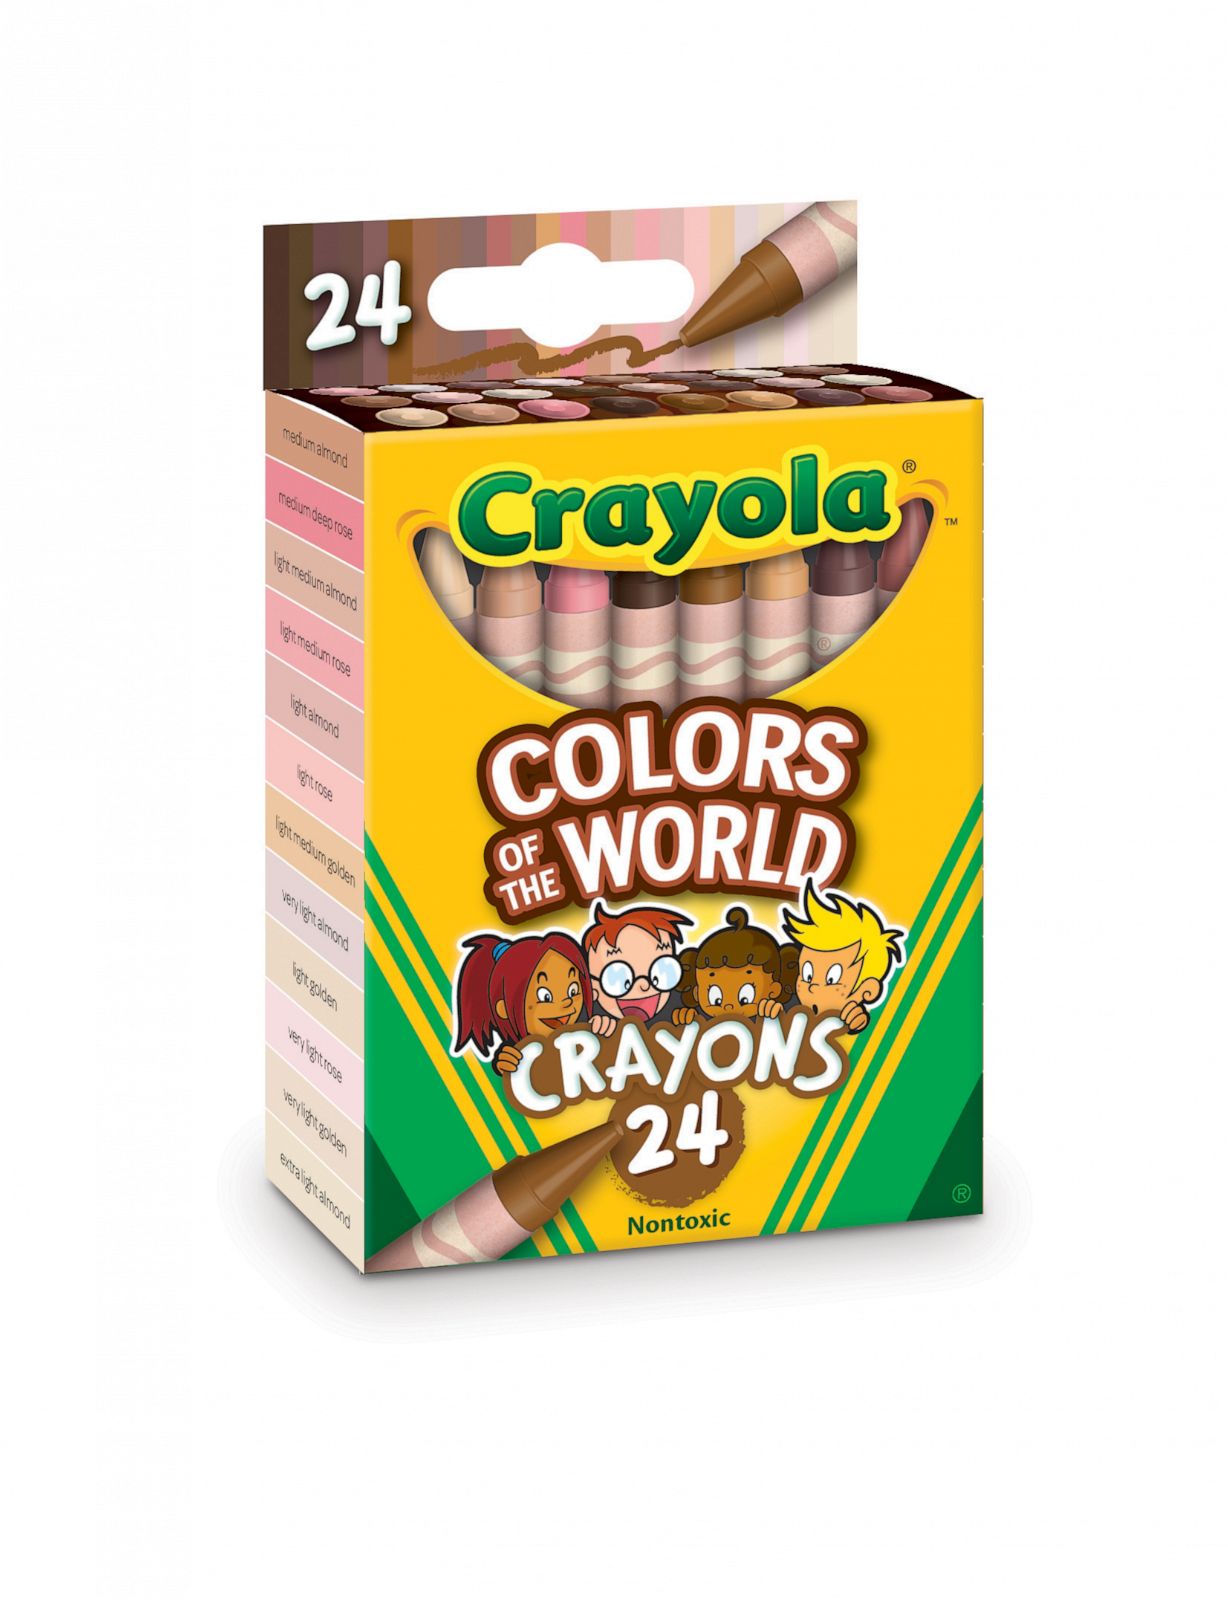 Crayola Launches Colors Of The World Skin Tone Inspired Crayon Colors Wjbf,American Airlines Wifi Free